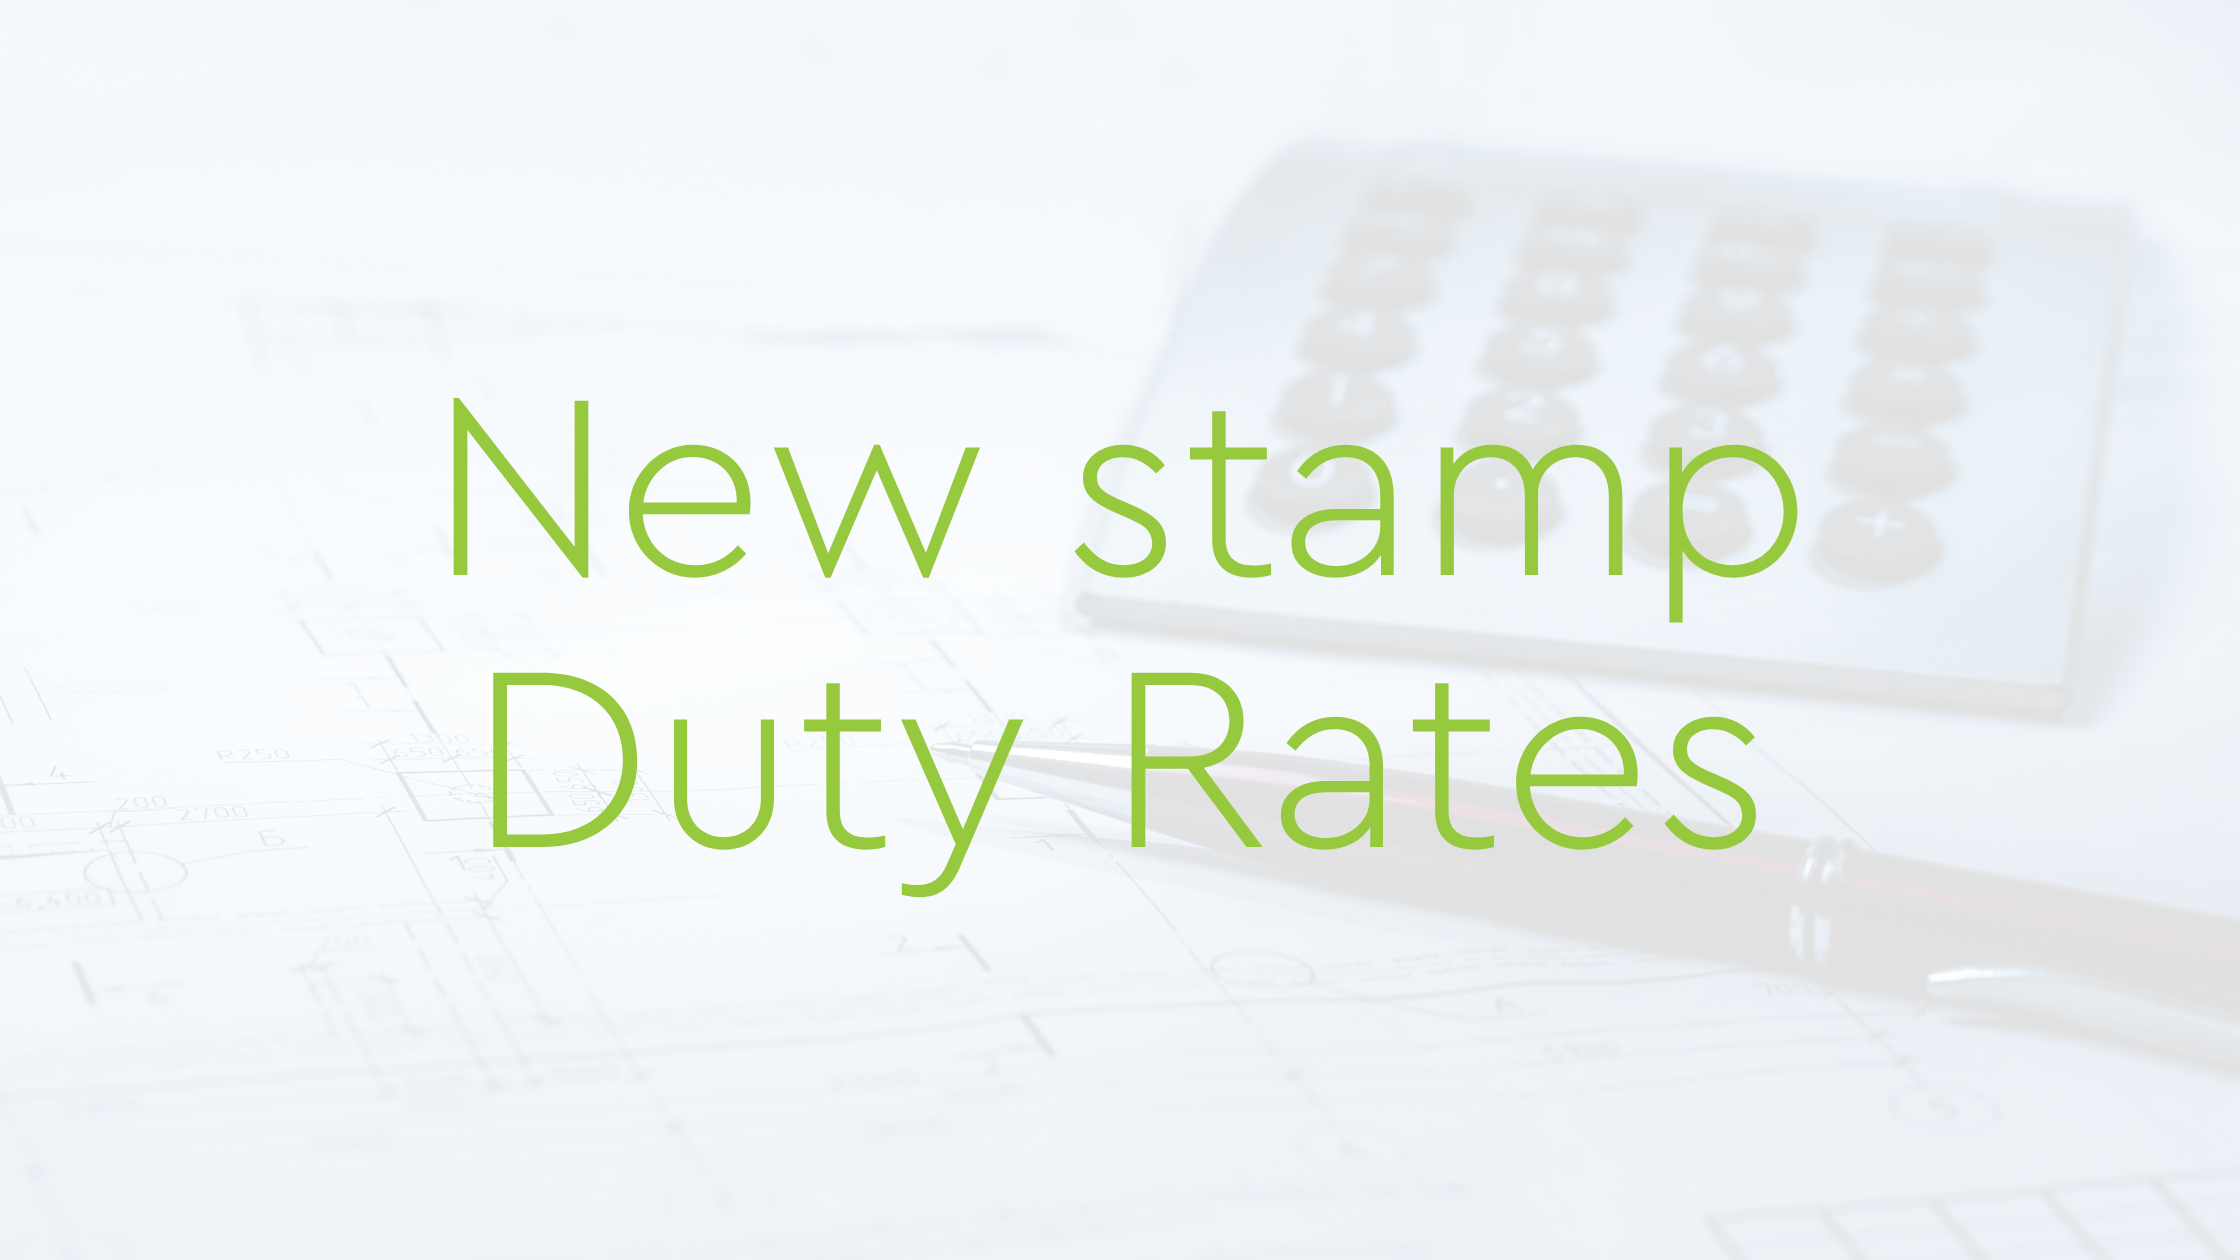 New stamp duty rates! 